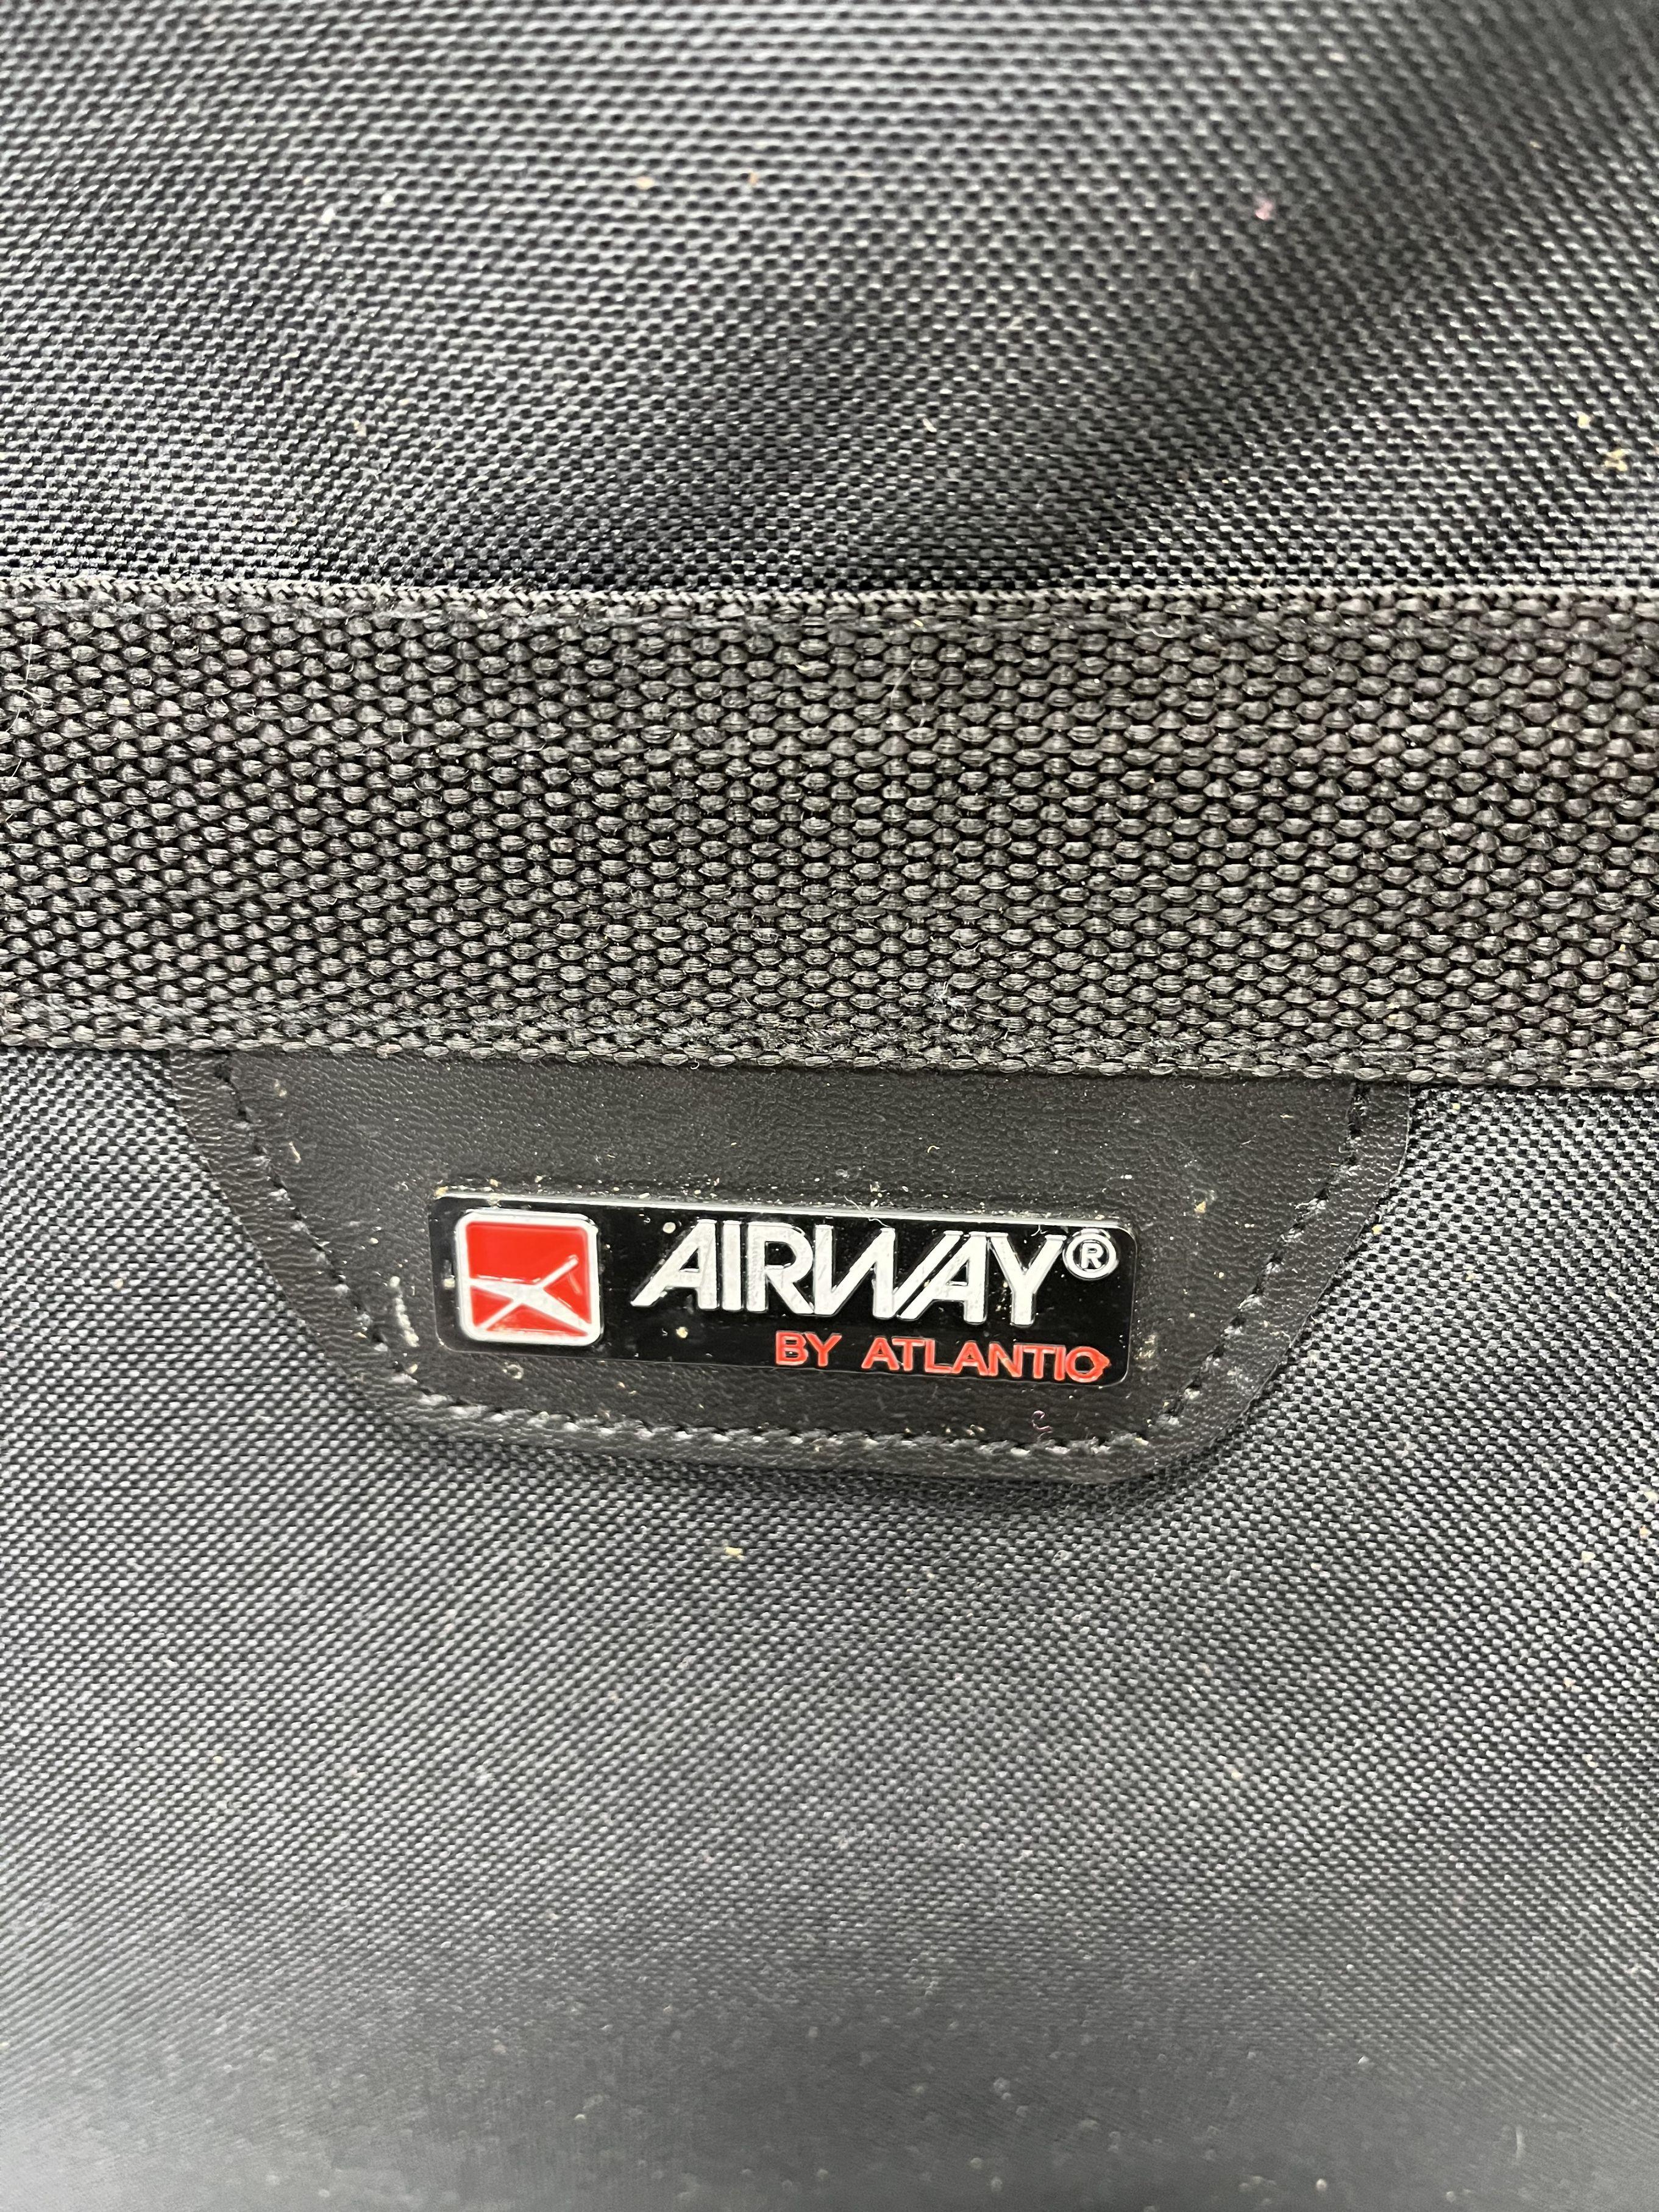 Airway by Atlantic Large Roller Luggage Piece with Toiletary Bag